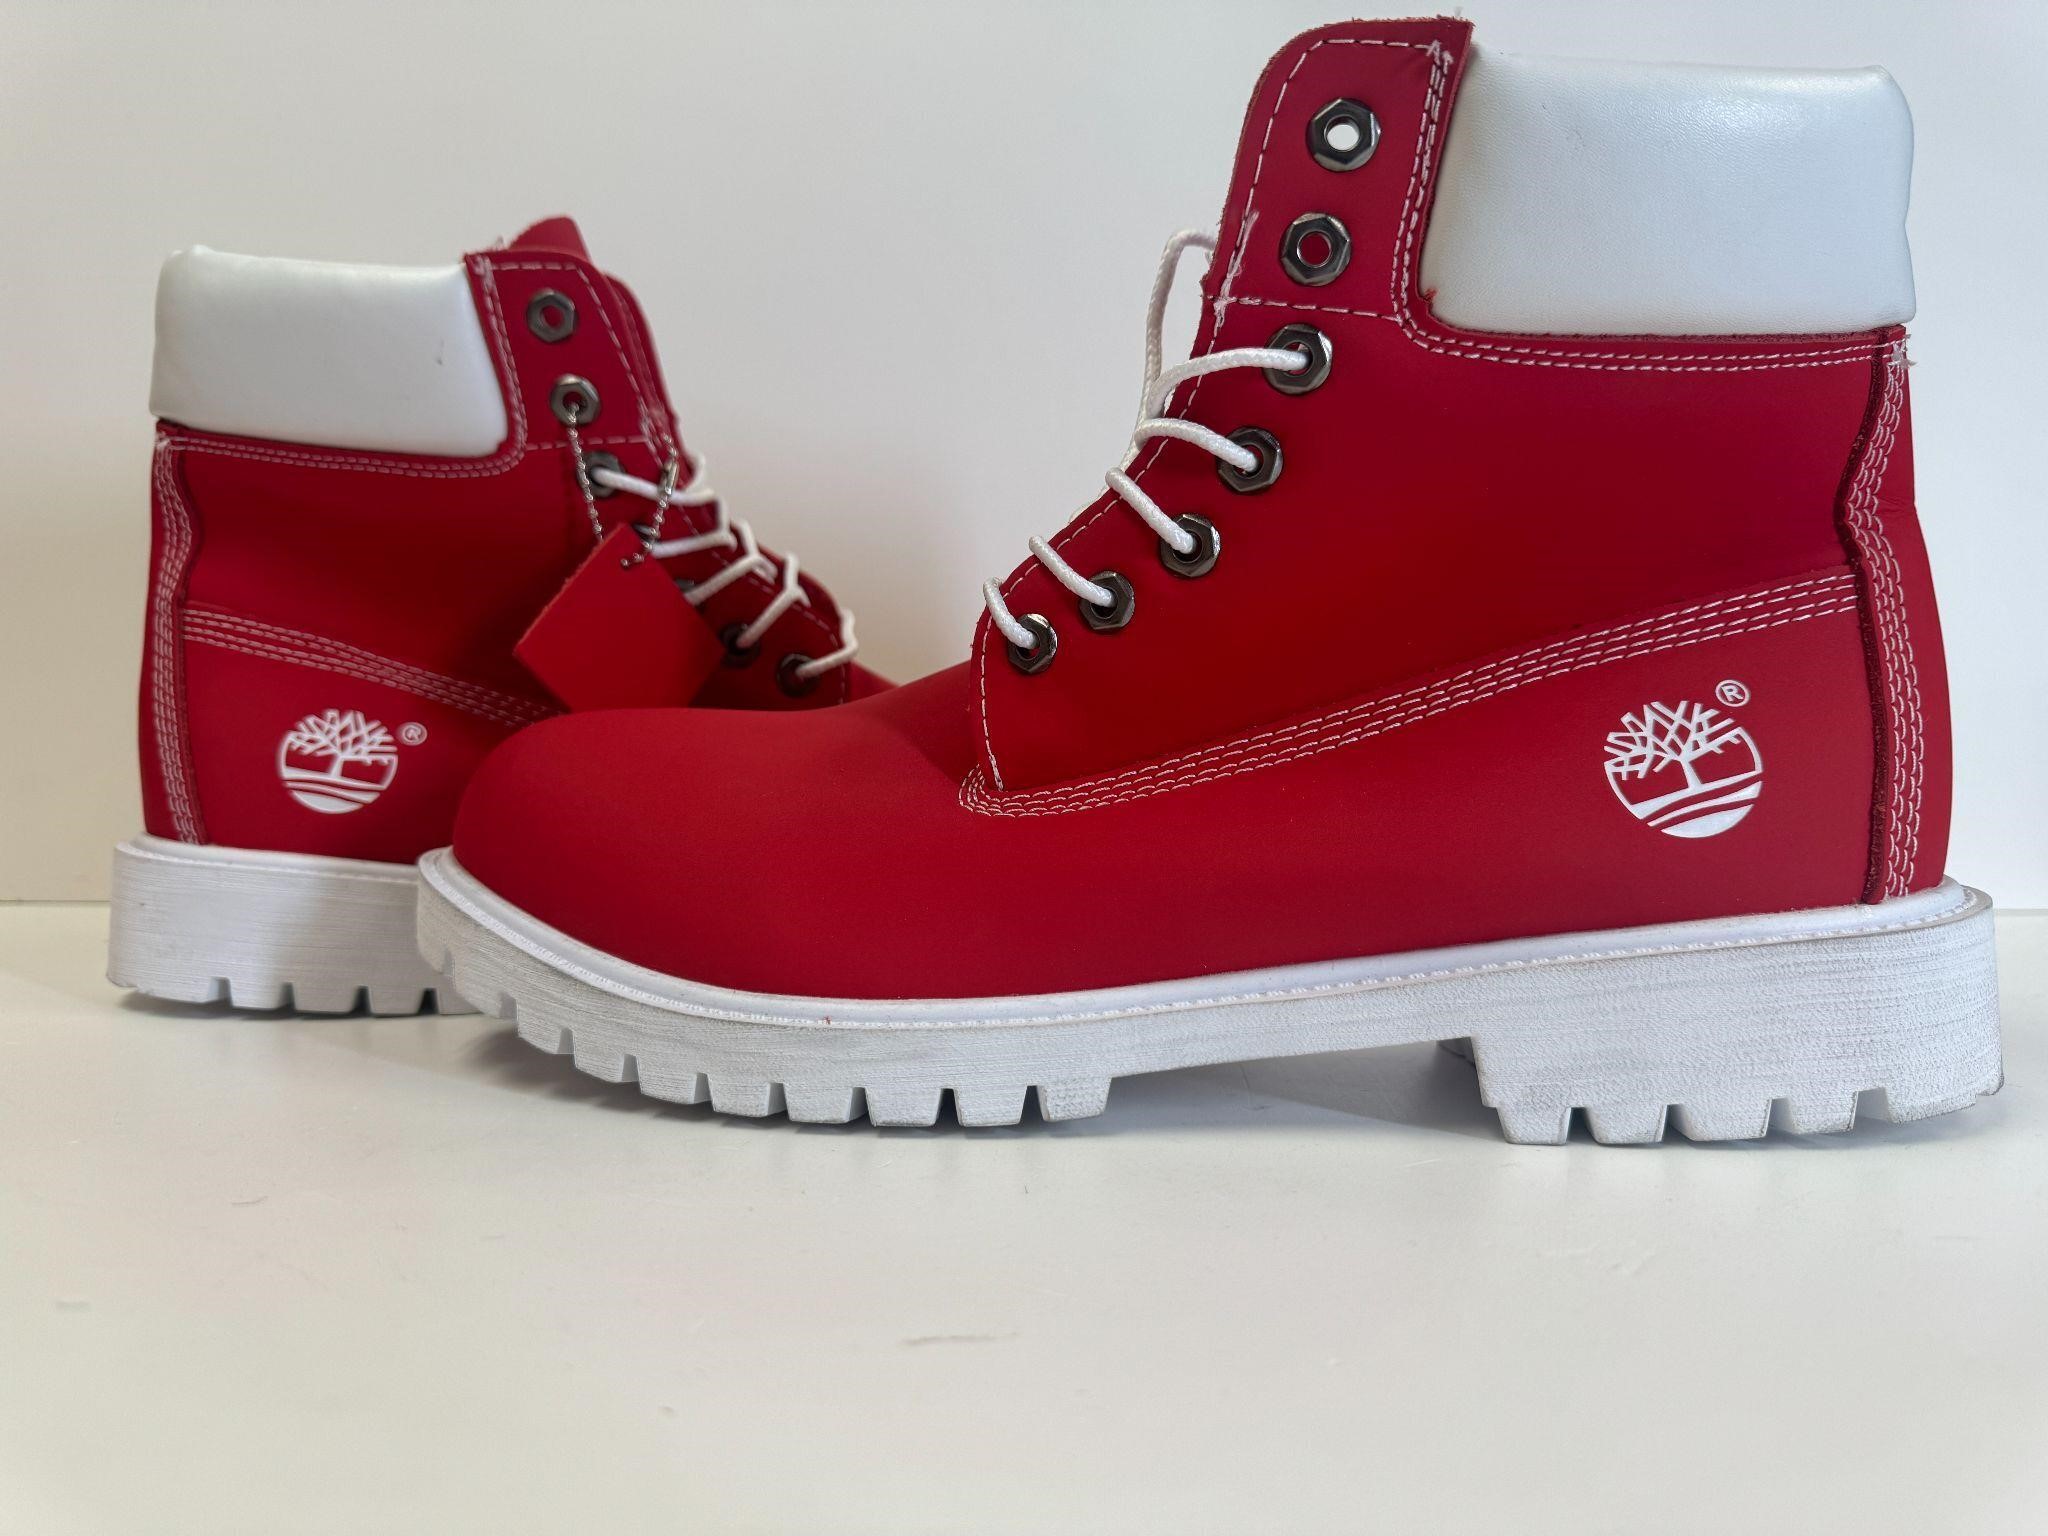 Timberland Men's 6" Red / White Waterproof Boots